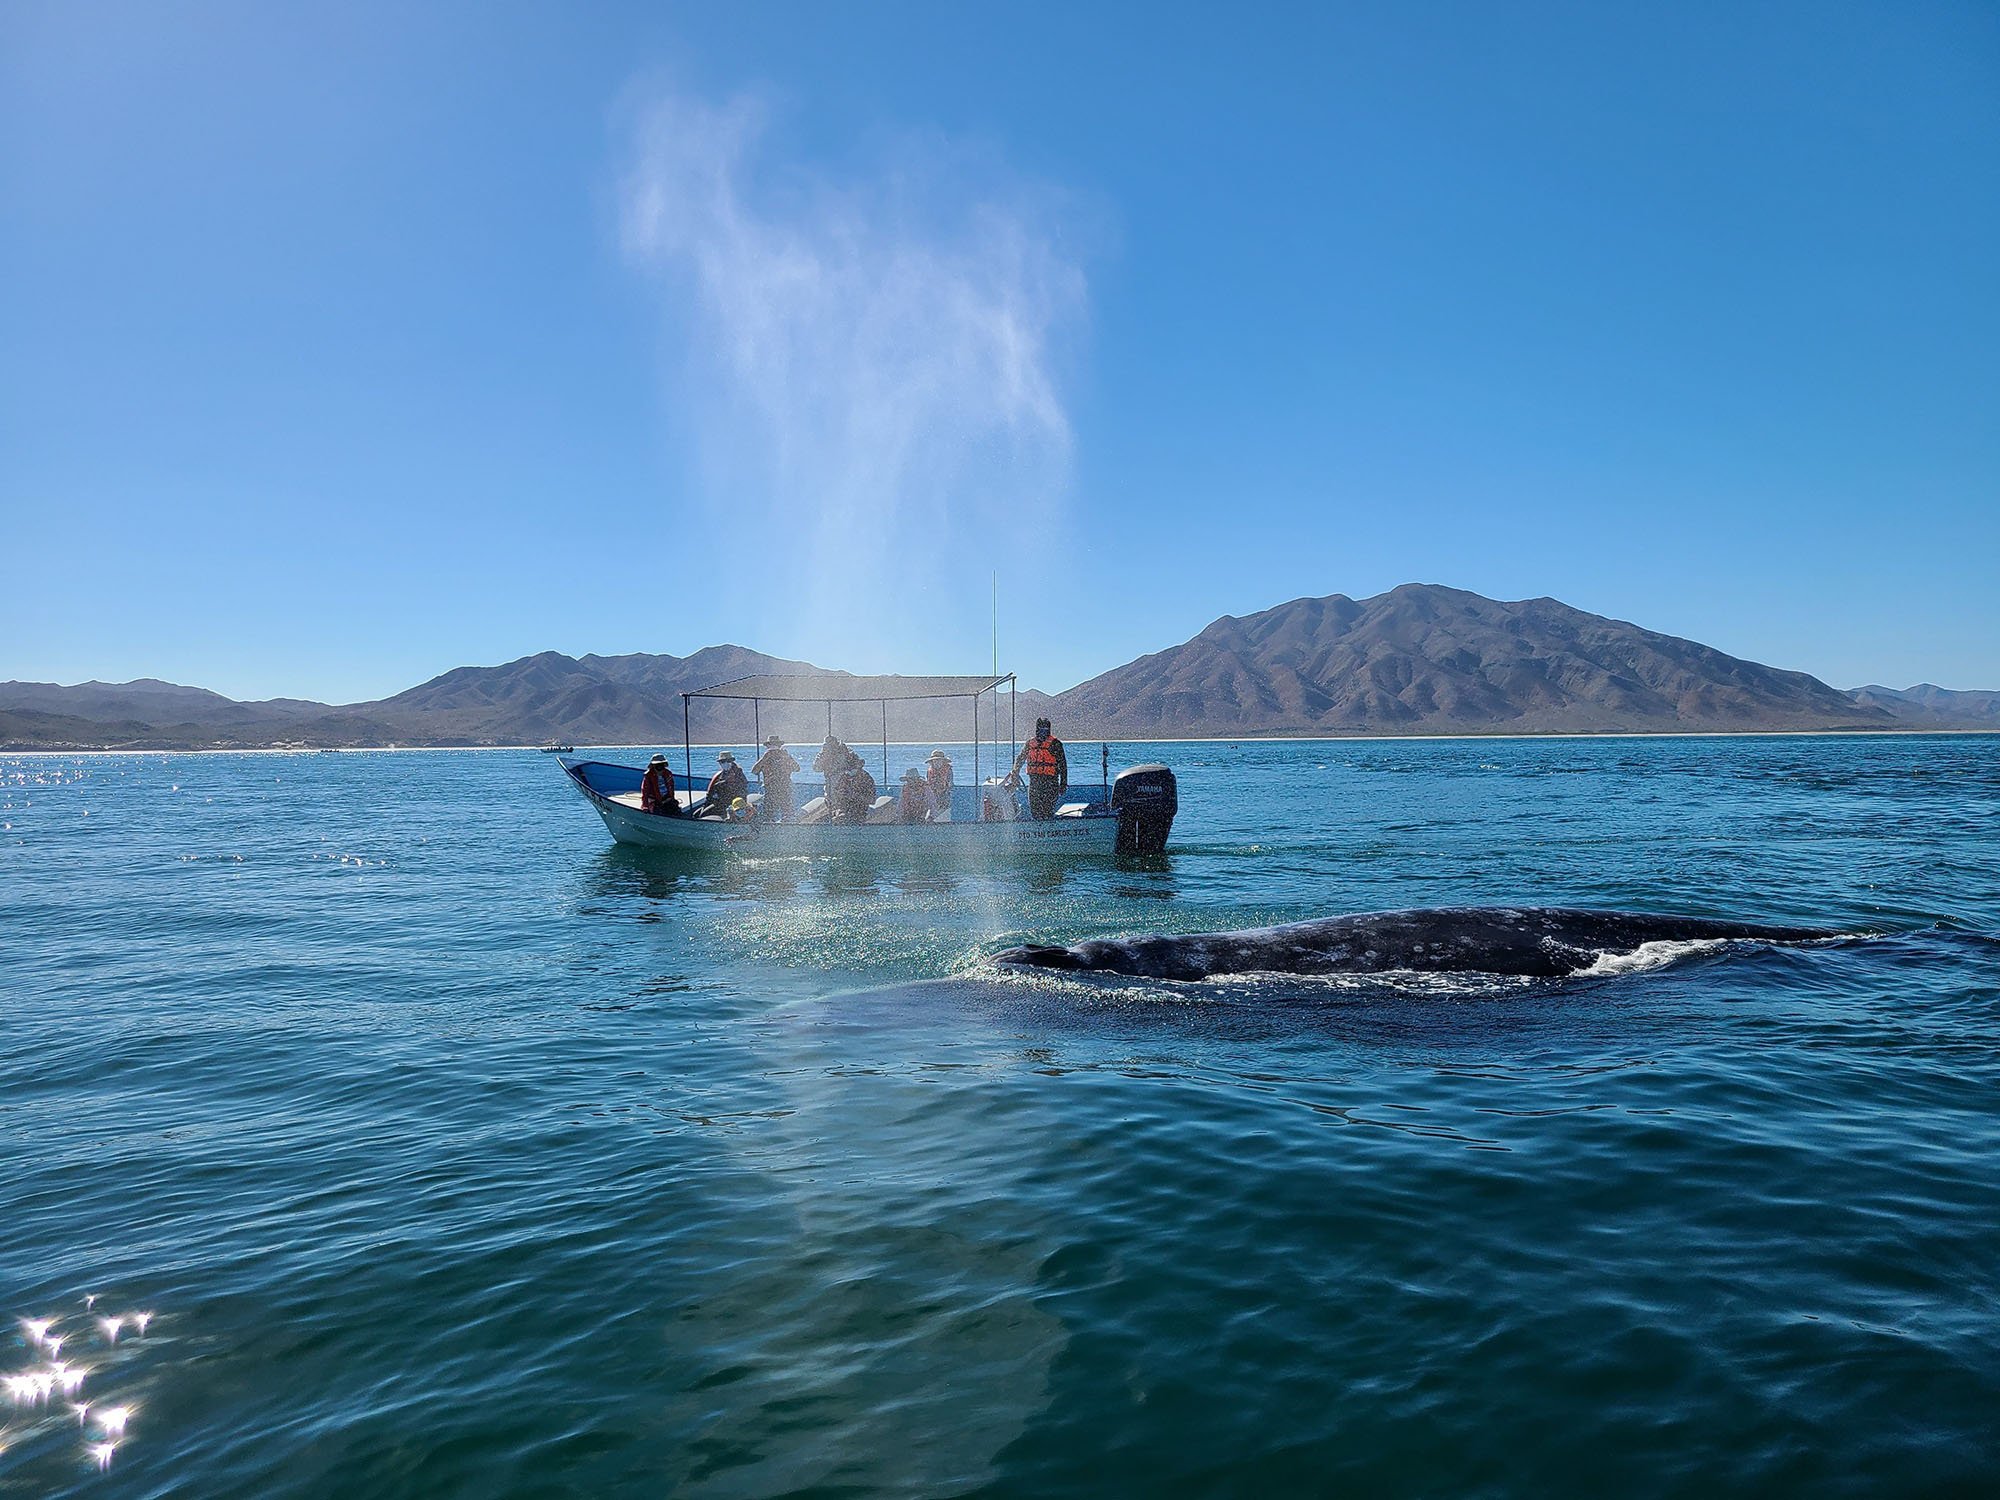 whale surfacing in front of a boat